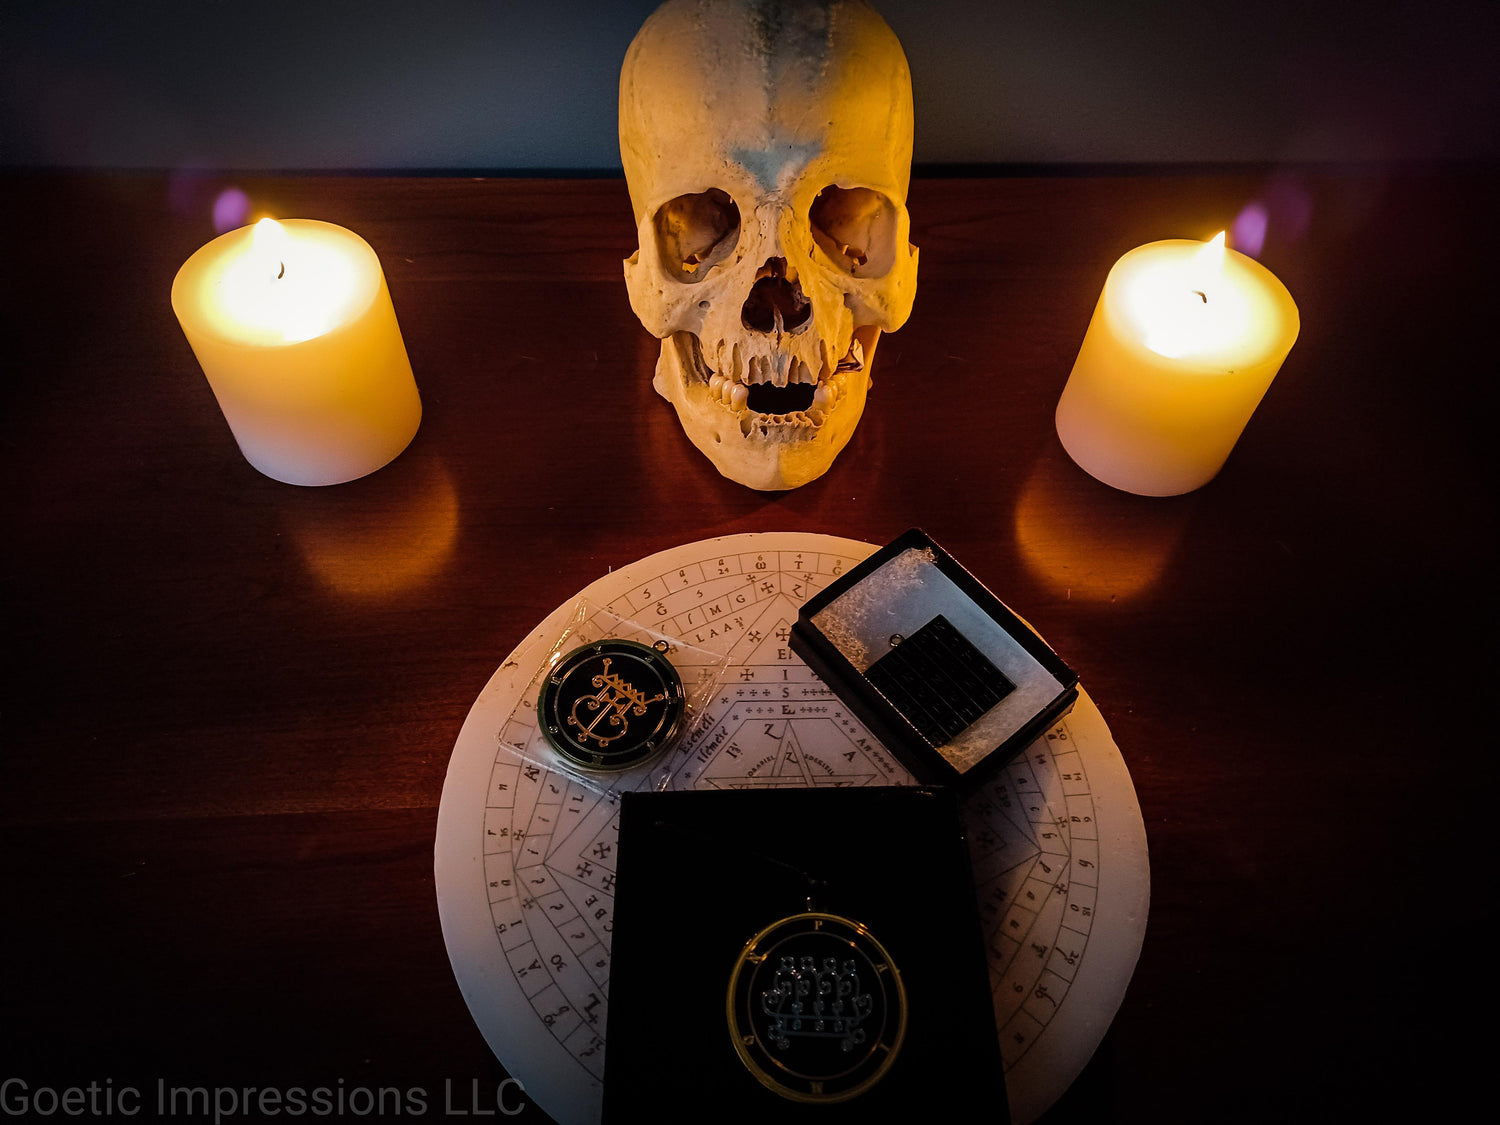 A human skull on an altar in between two lit candles. In front of the skull is an Enochian sigillum dei aemeth with various ritual tools on top.